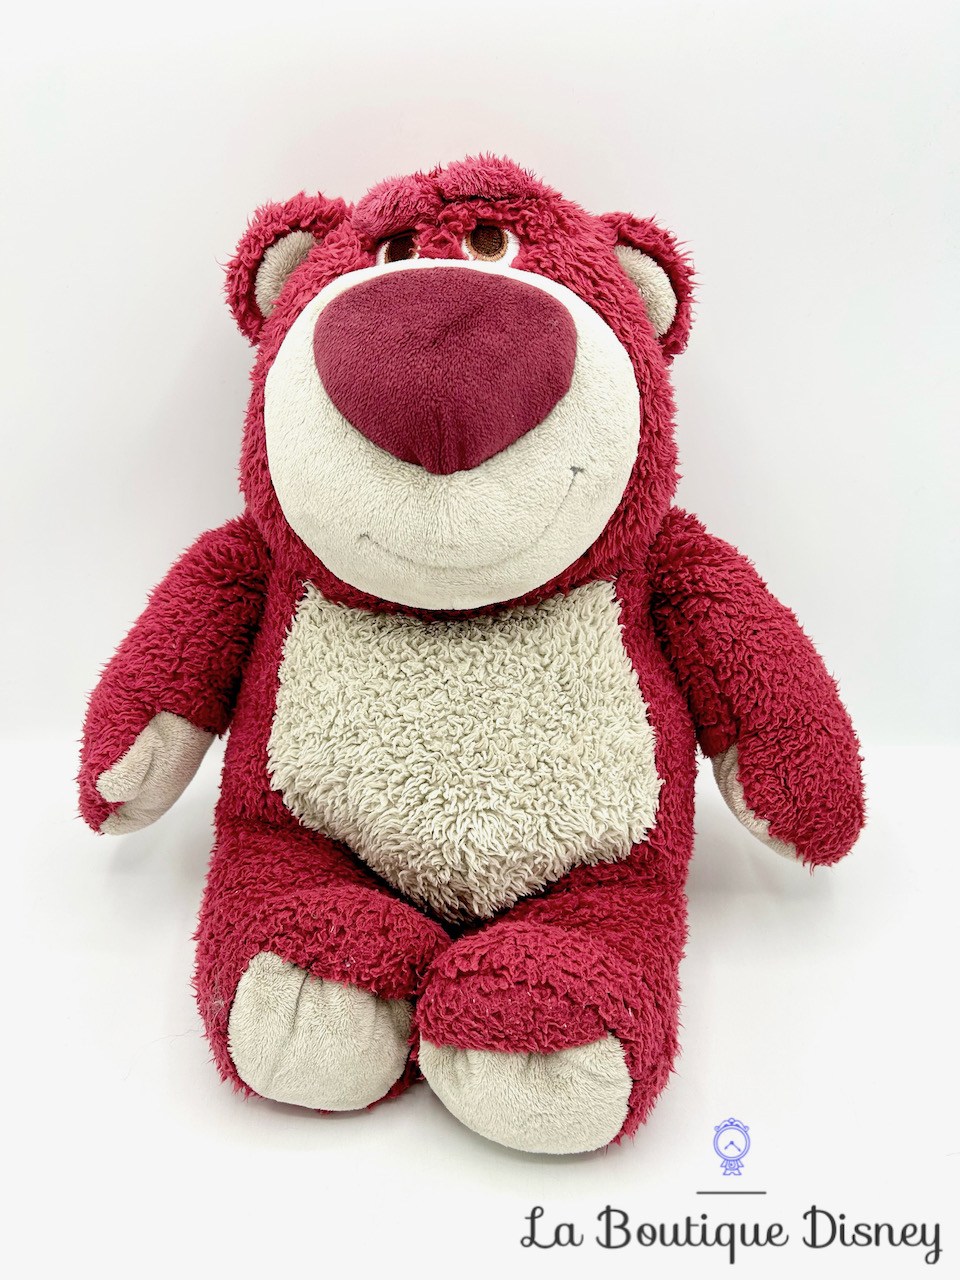 Peluche Lotso Toy Story Disney Store ours rose fraise 35 cm - Peluches/ Peluches Disney Store - La Boutique Disney